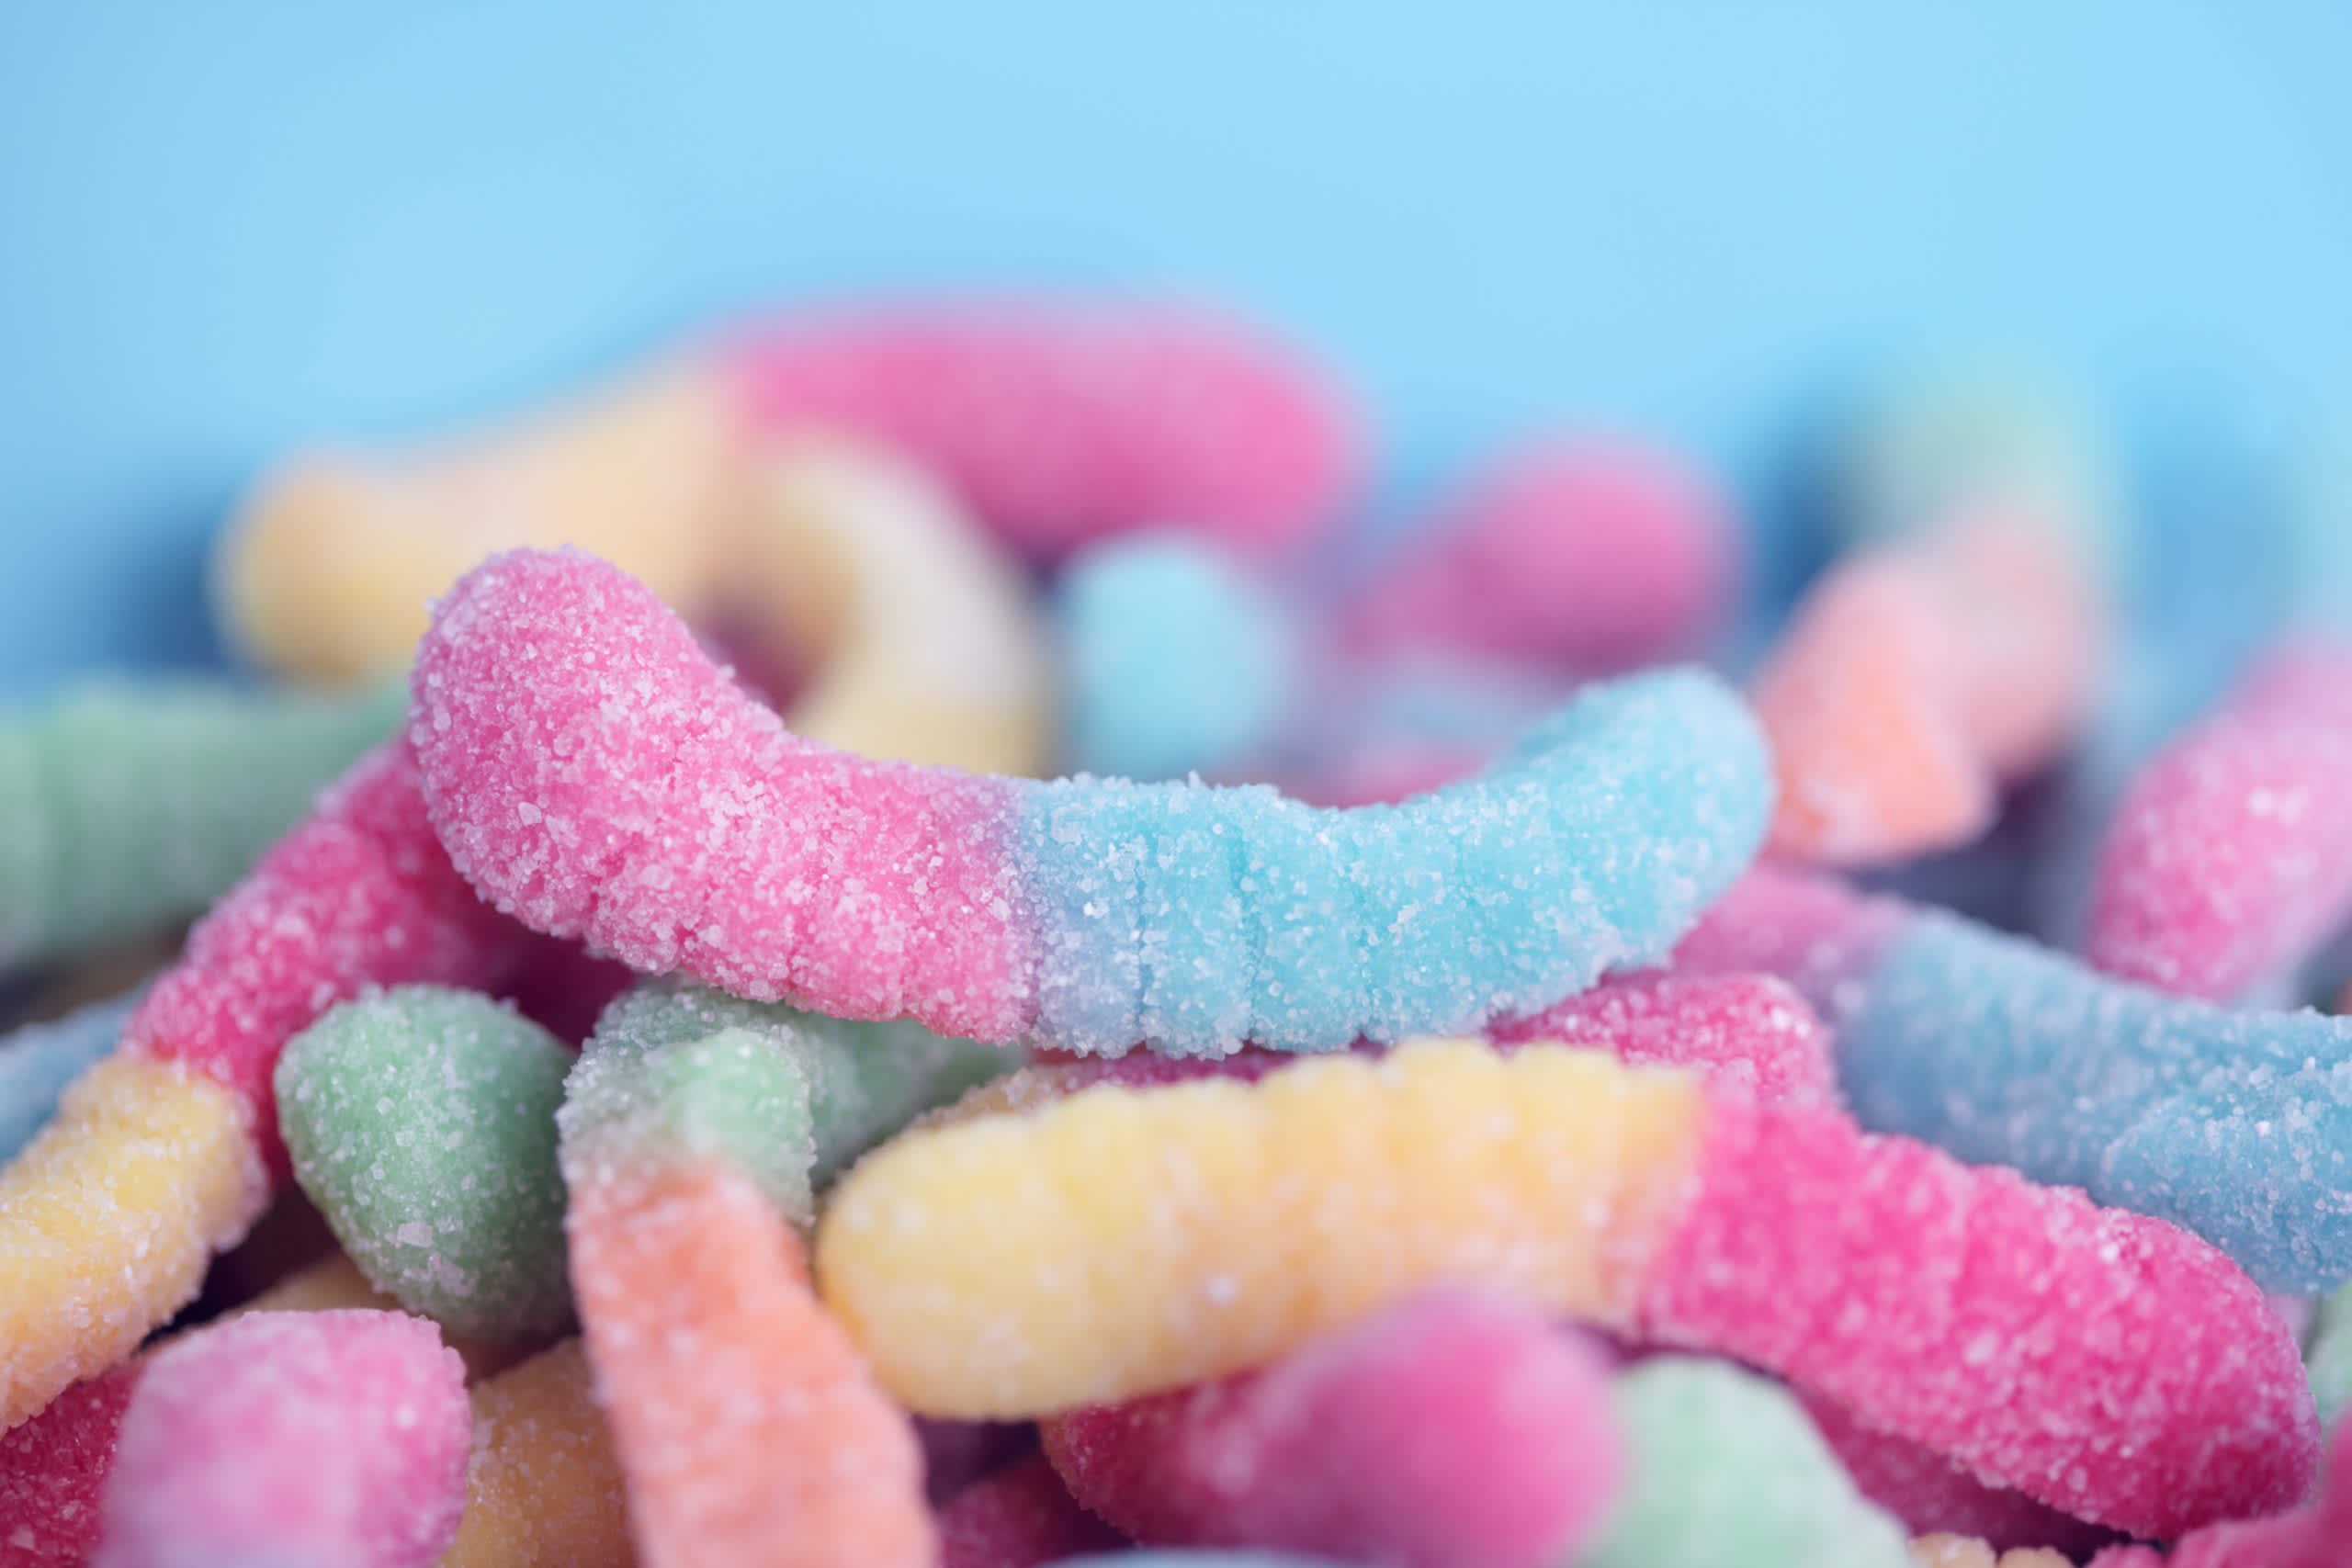 A pile of sour gummy worms